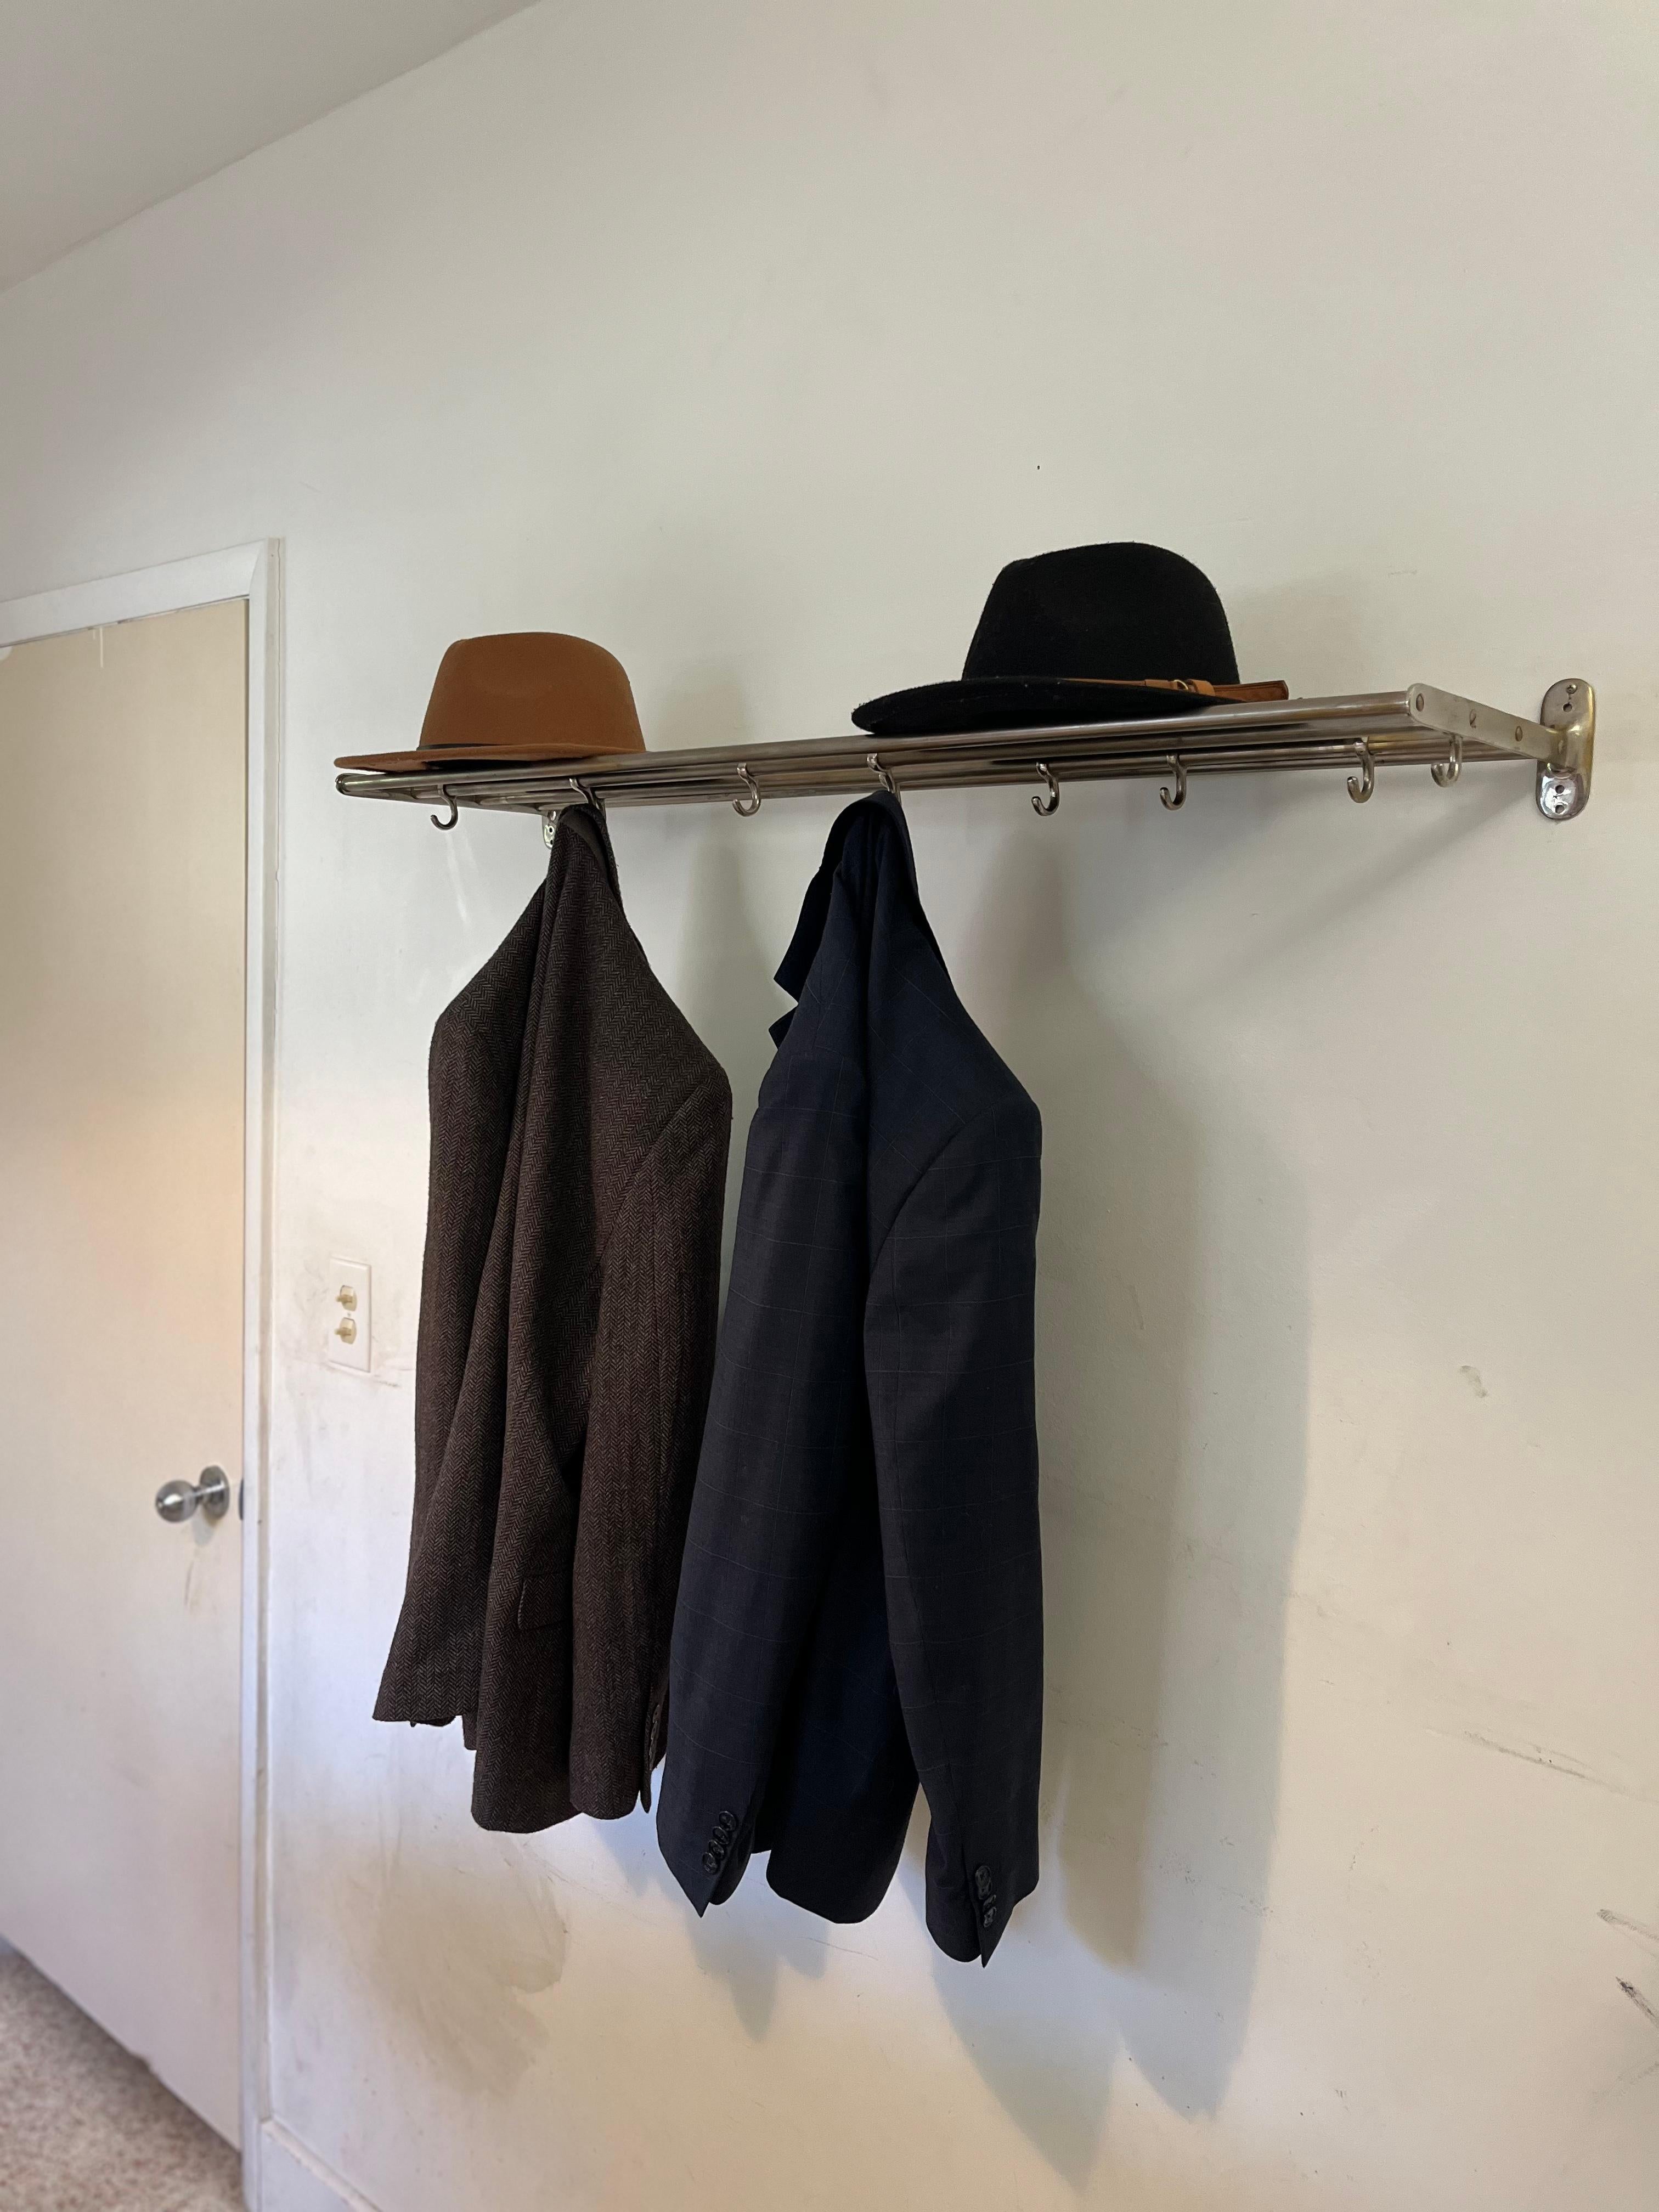 Wardrobe Hat Rack by Karl Hagenauer from 1932, steel nickel plated. From the estate of Max Fellerer, comes with original invoice. 
Max Fellerer (1889–1957) trained in Vienna at the Technische Hochschule under Karl König and at the Akademie der